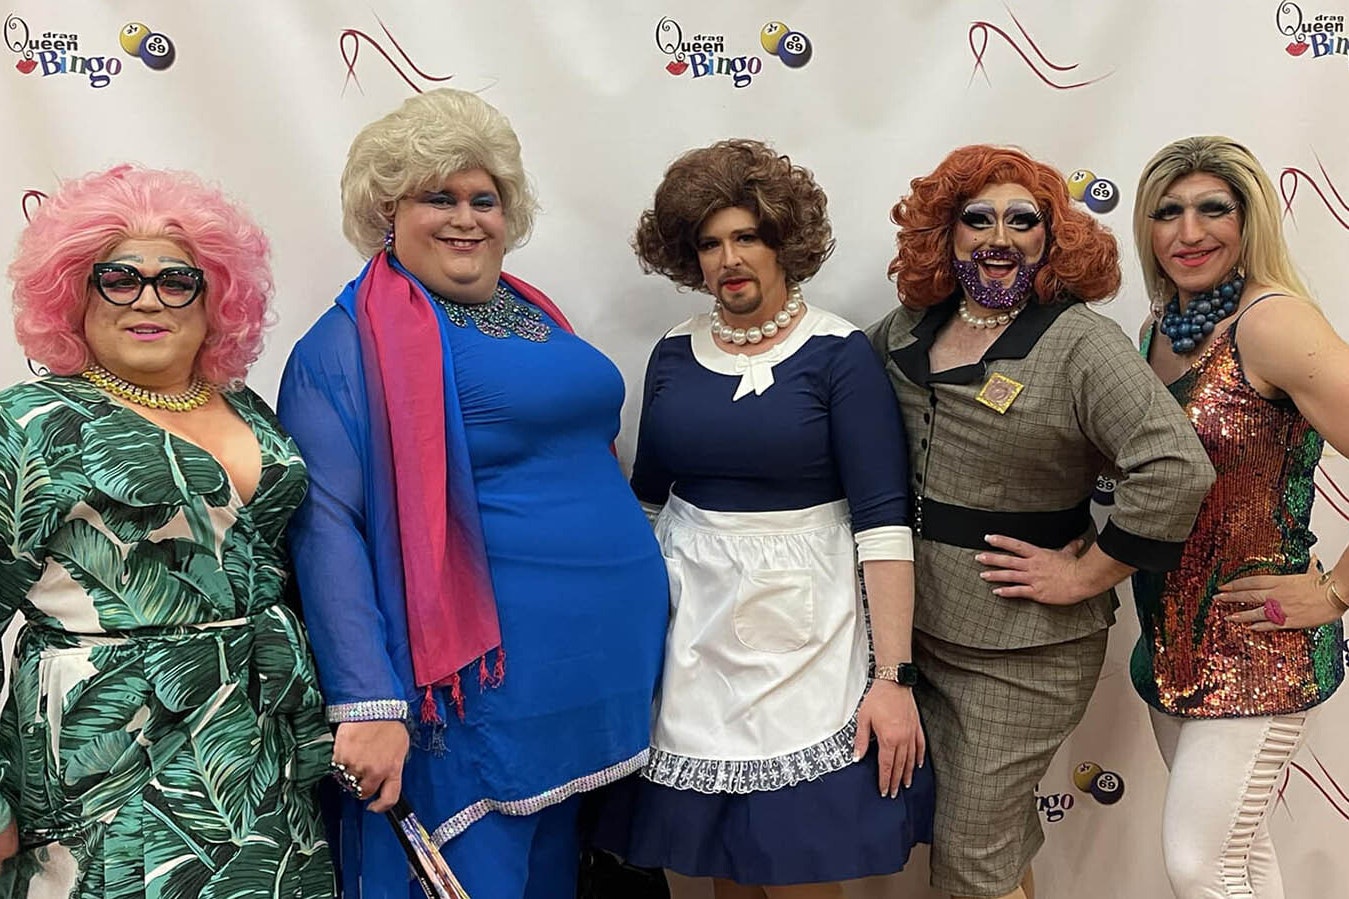 The Stilettos is a Laramie, Wyoming-based drag queen group that helps put on the annual Drag Queen Bingo event.